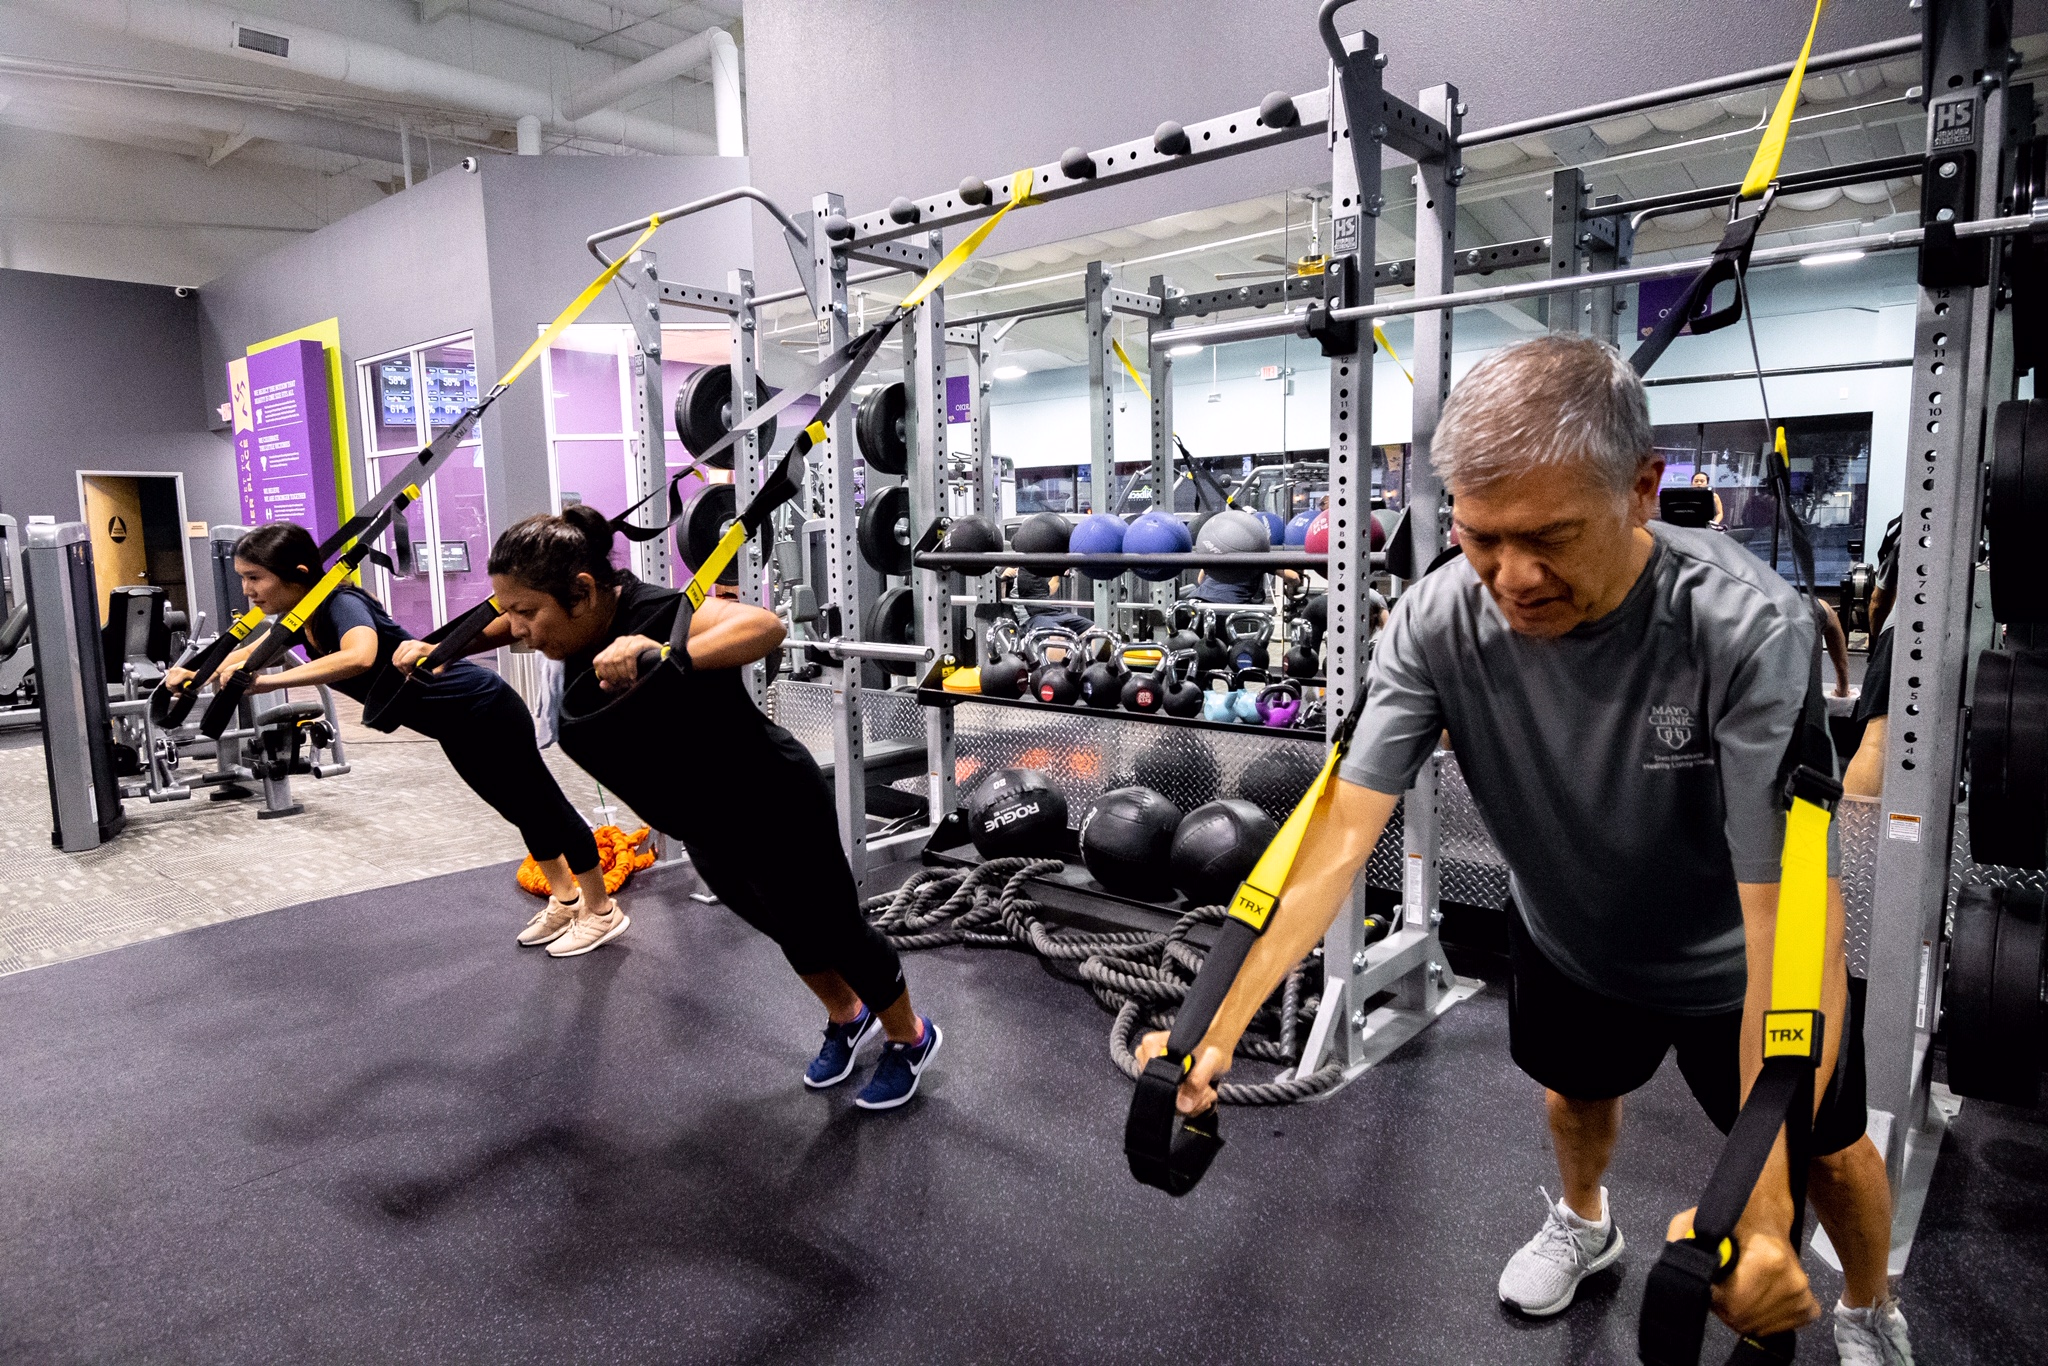 15 Minute Anytime Fitness Job Openings Near Me for Gym